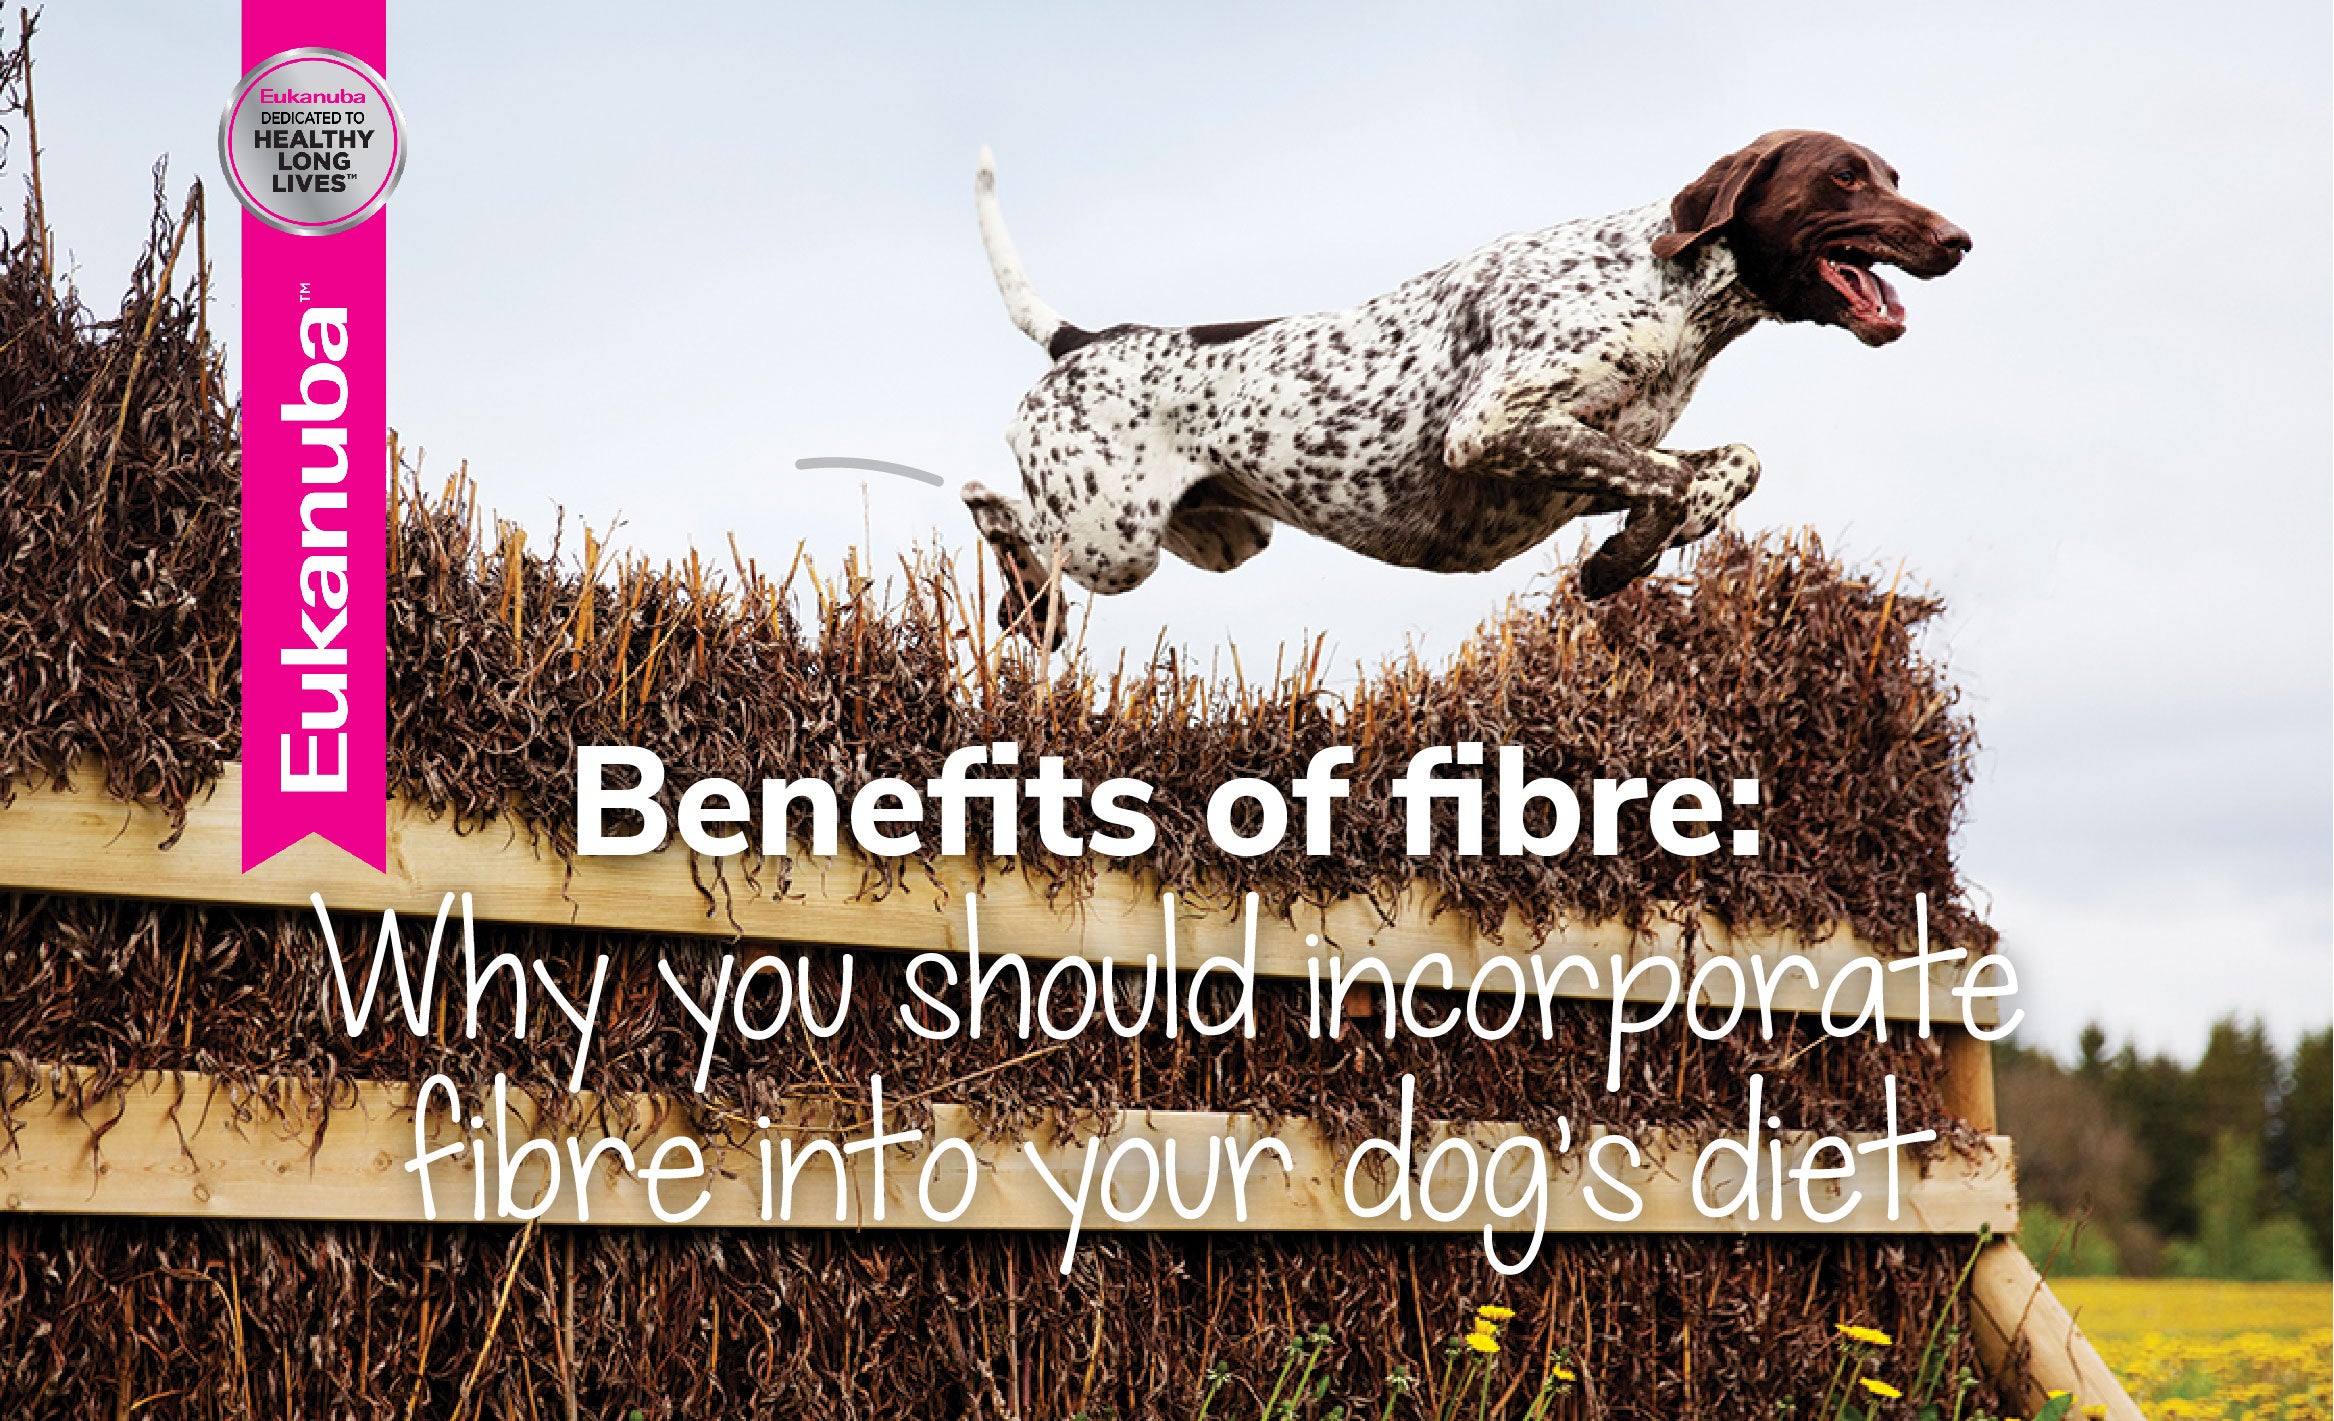 Why You Should Incorporate Fibre Into Your Dog's Diet